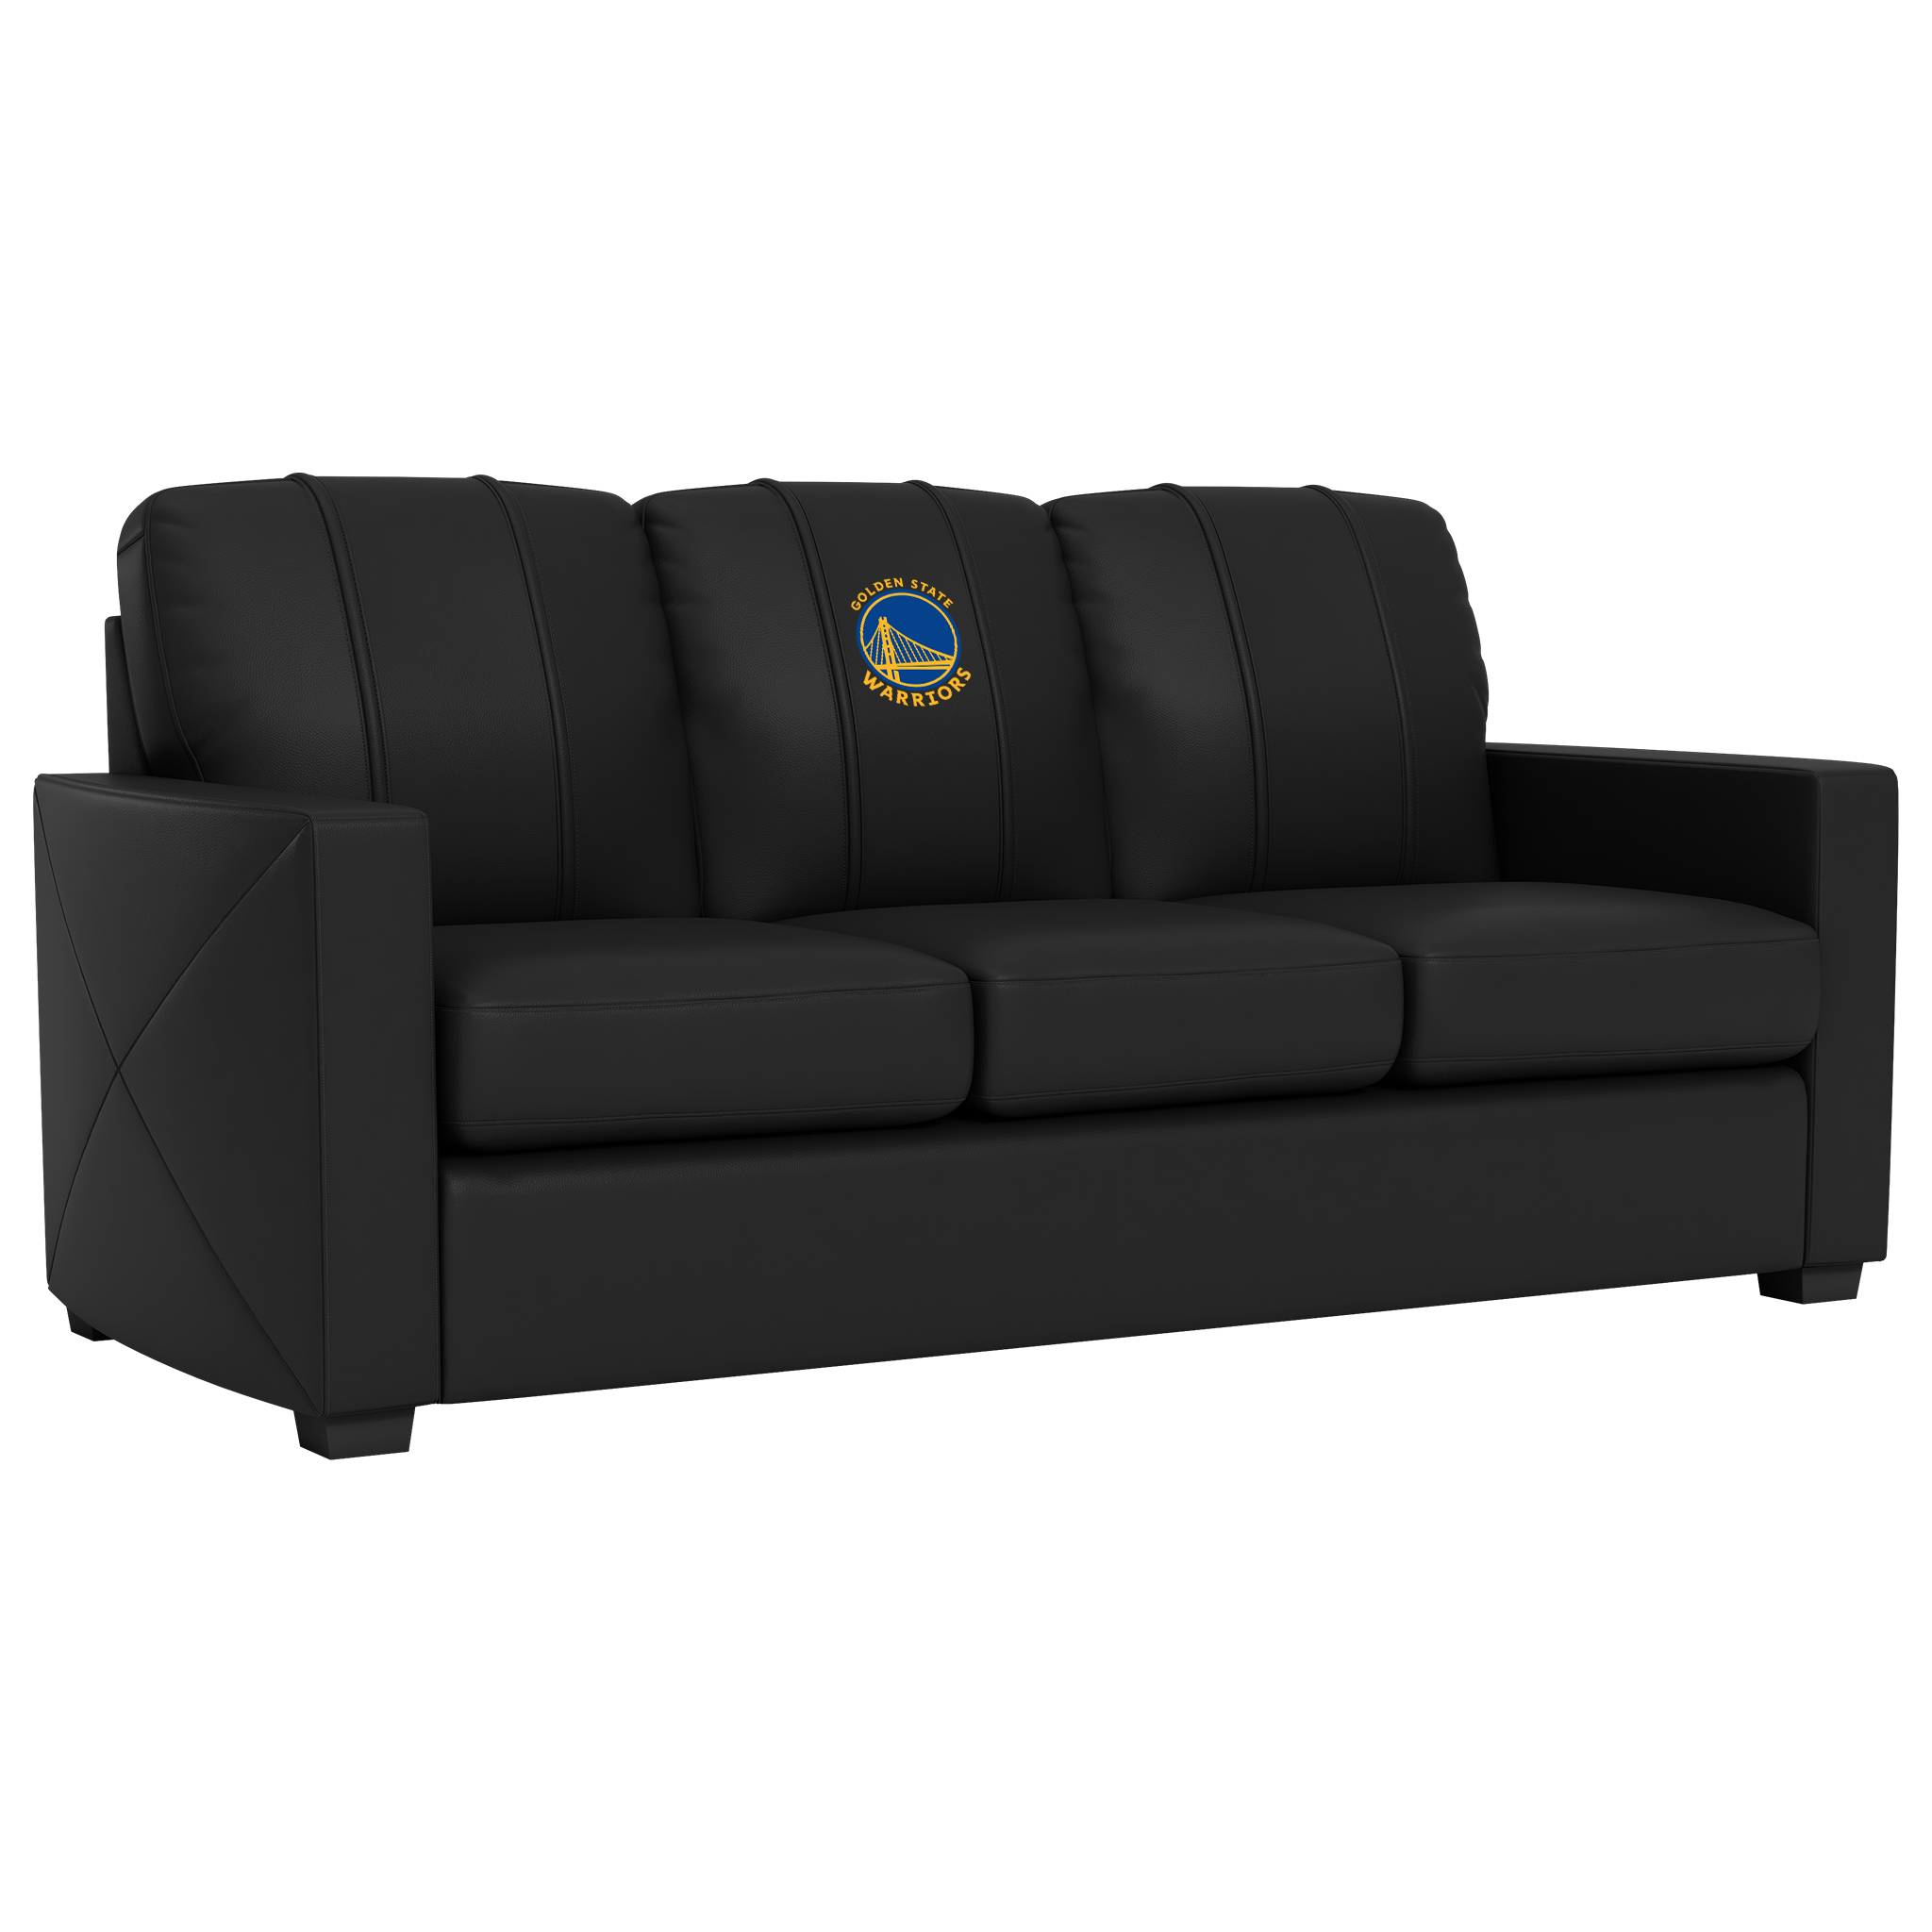 Golden State Warriors Silver Sofa with Golden State Warriors Global Logo